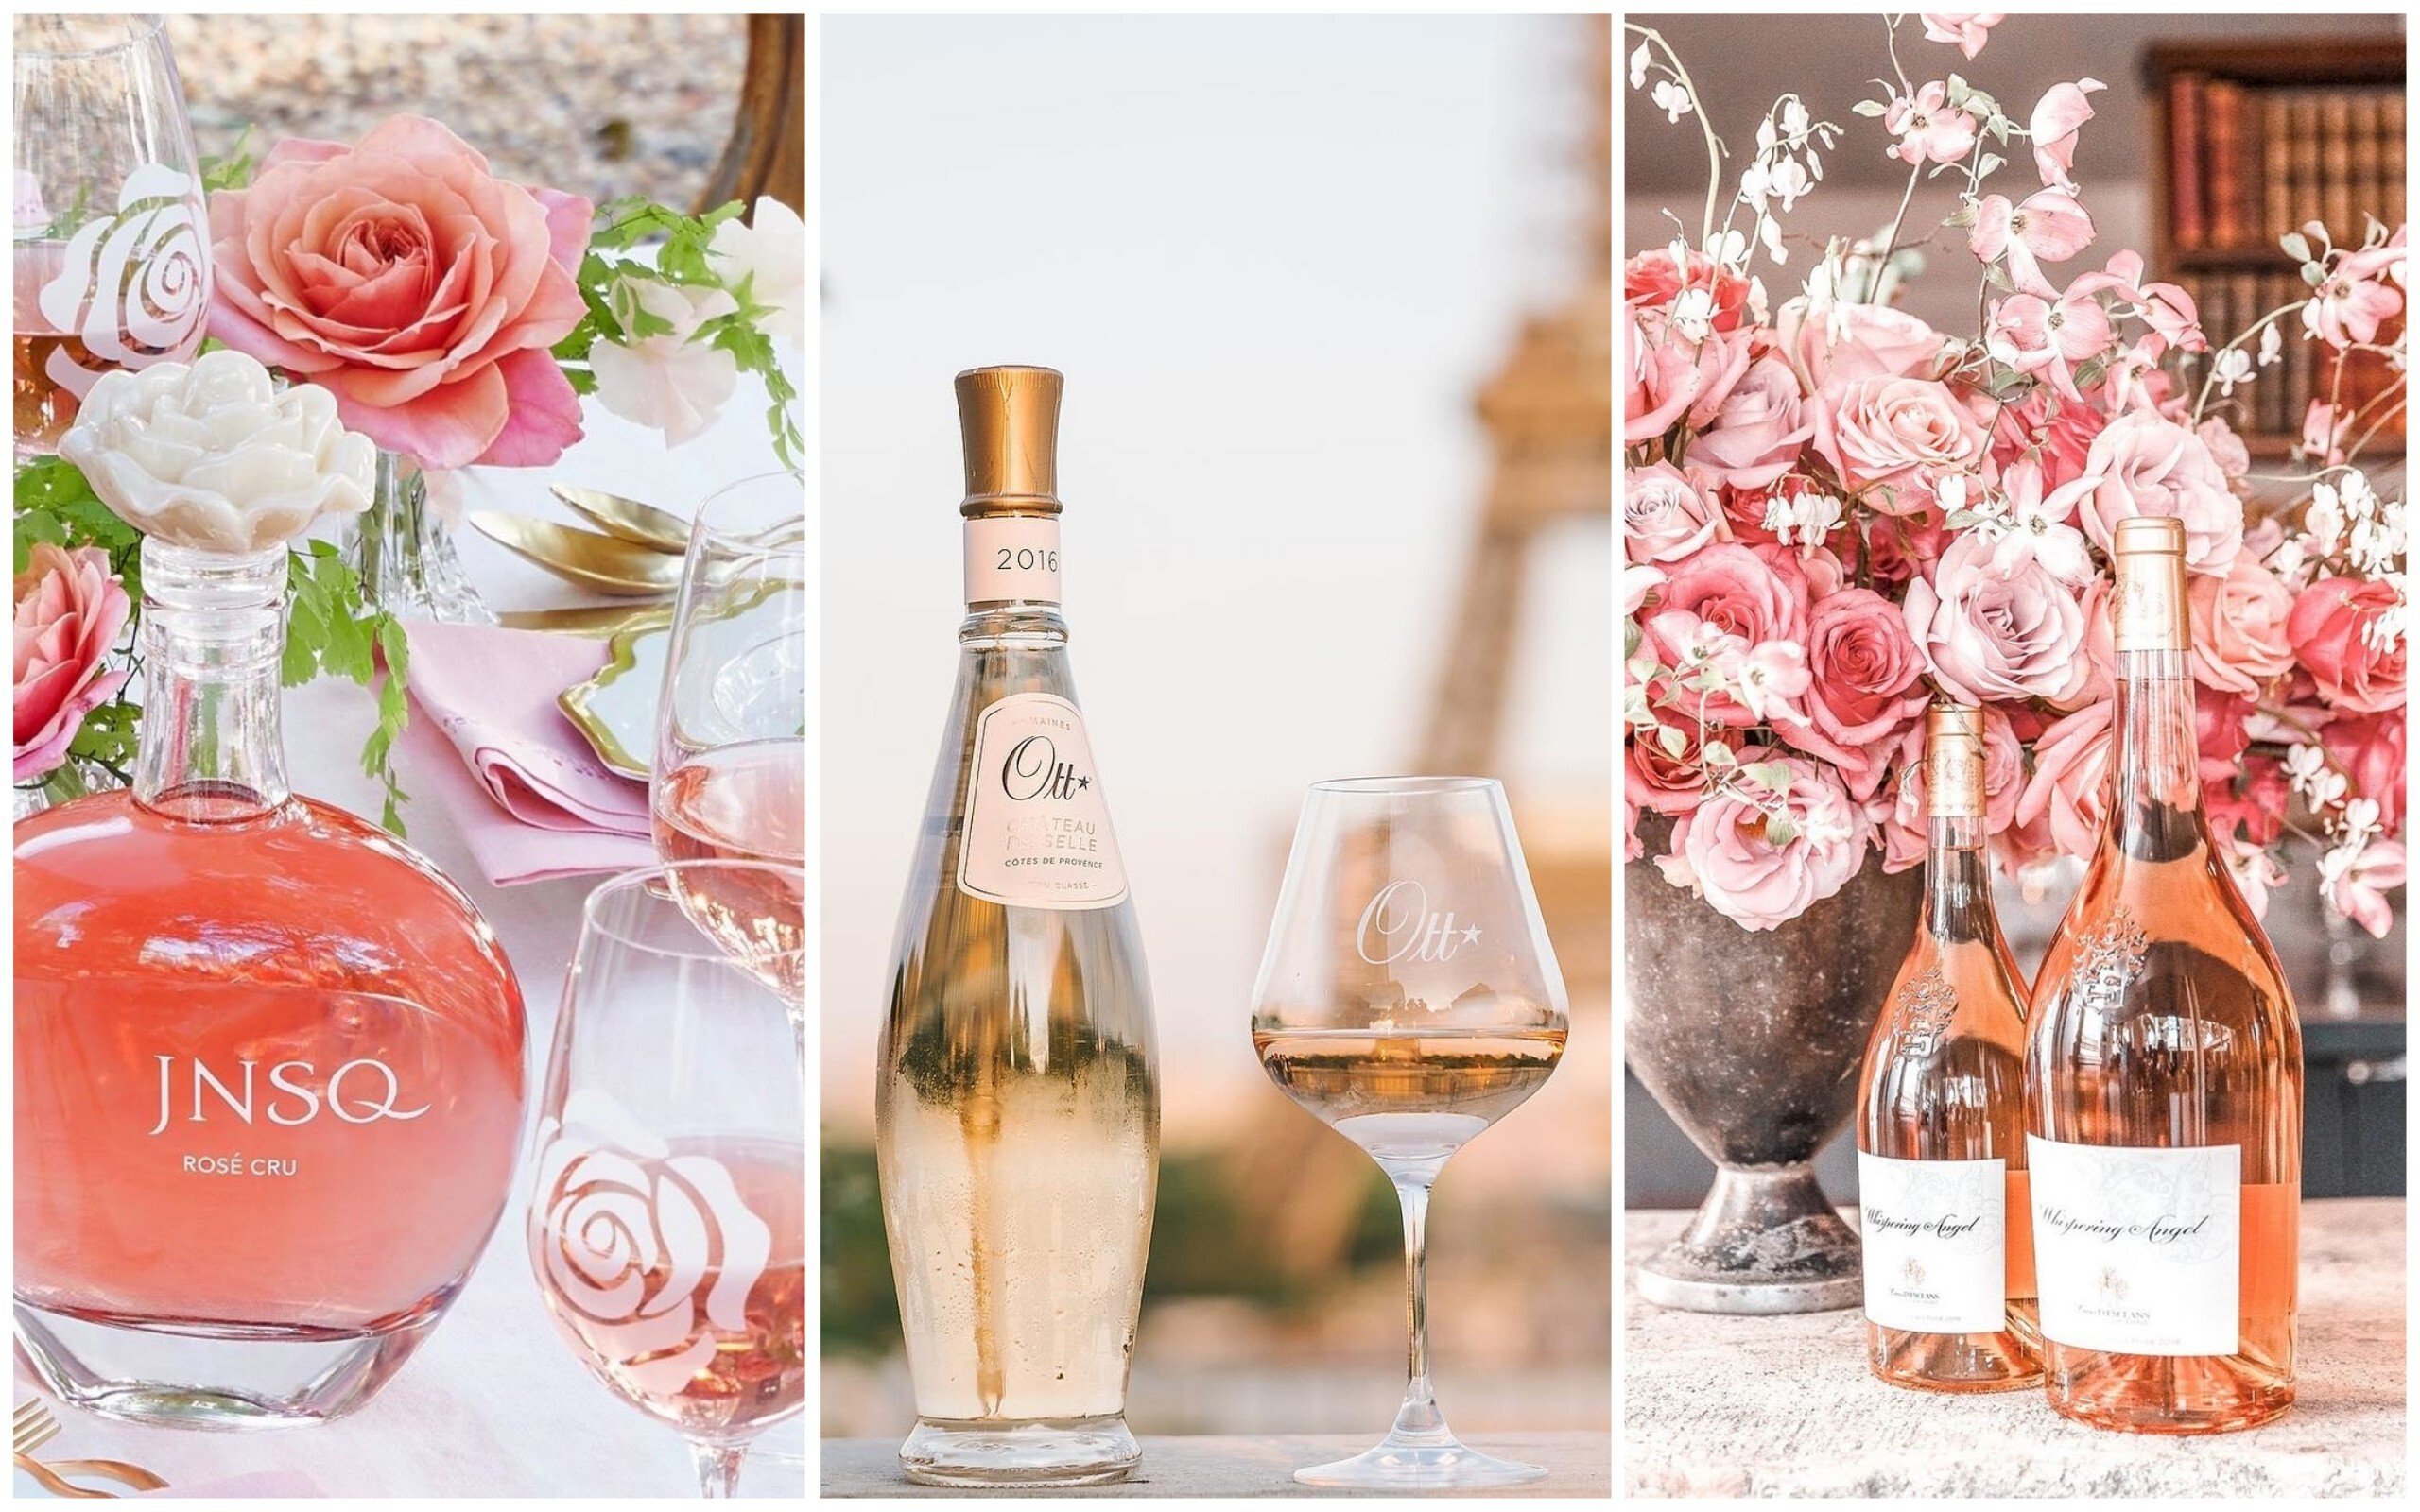 The best rosé to drink now, hand picked by our experts Photo: @jnsqwines @domainesott @thewhisperingangel/ Instagram